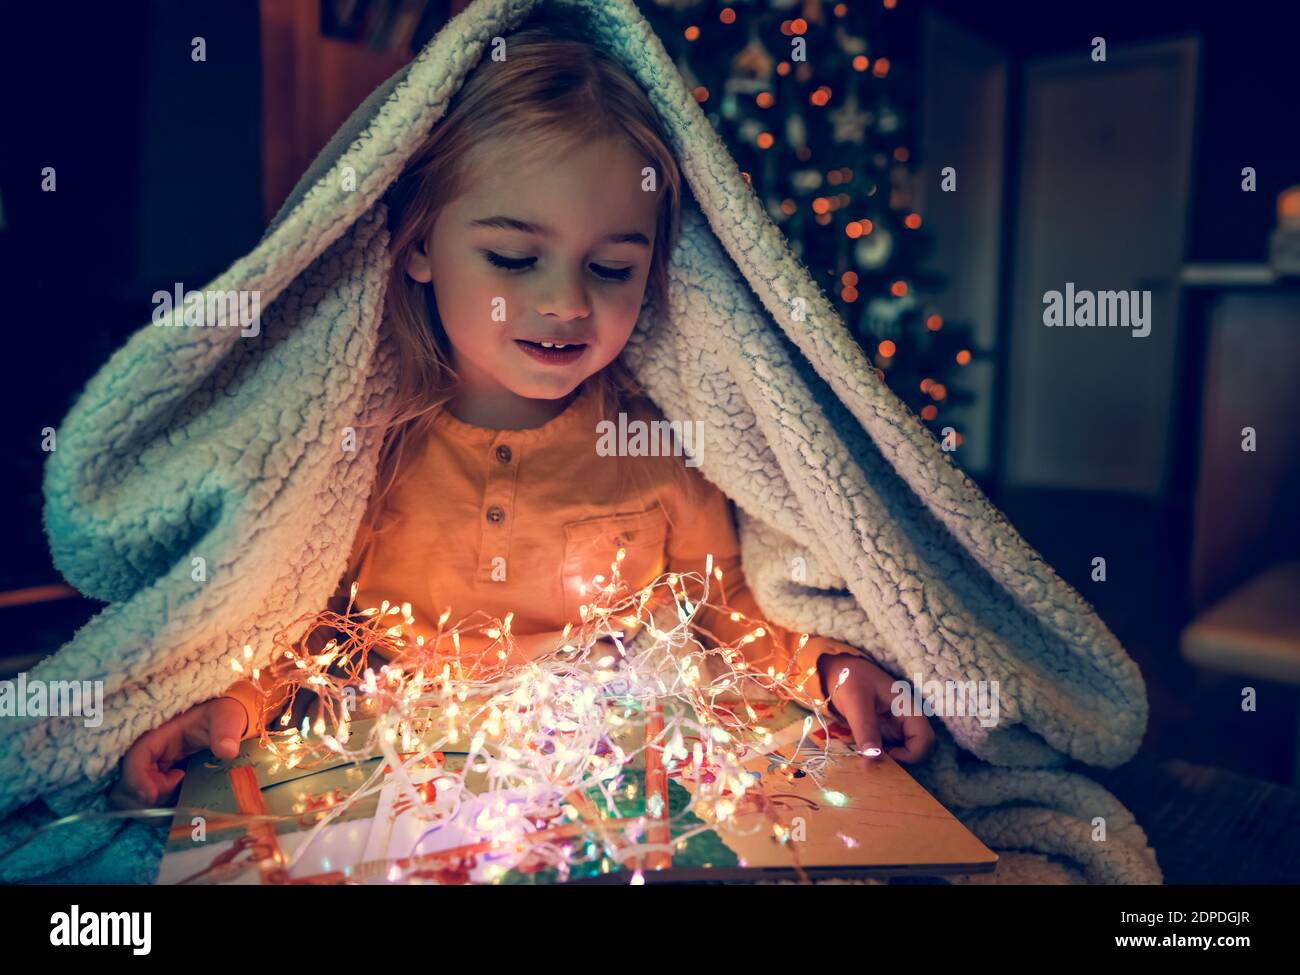 Cute Little Baby Under Plaid with Pleasure Reading Christmas Tale Book and Enjoying Beautiful Glowing Gift. Hygge. Christmas Eve at Home. Stock Photo